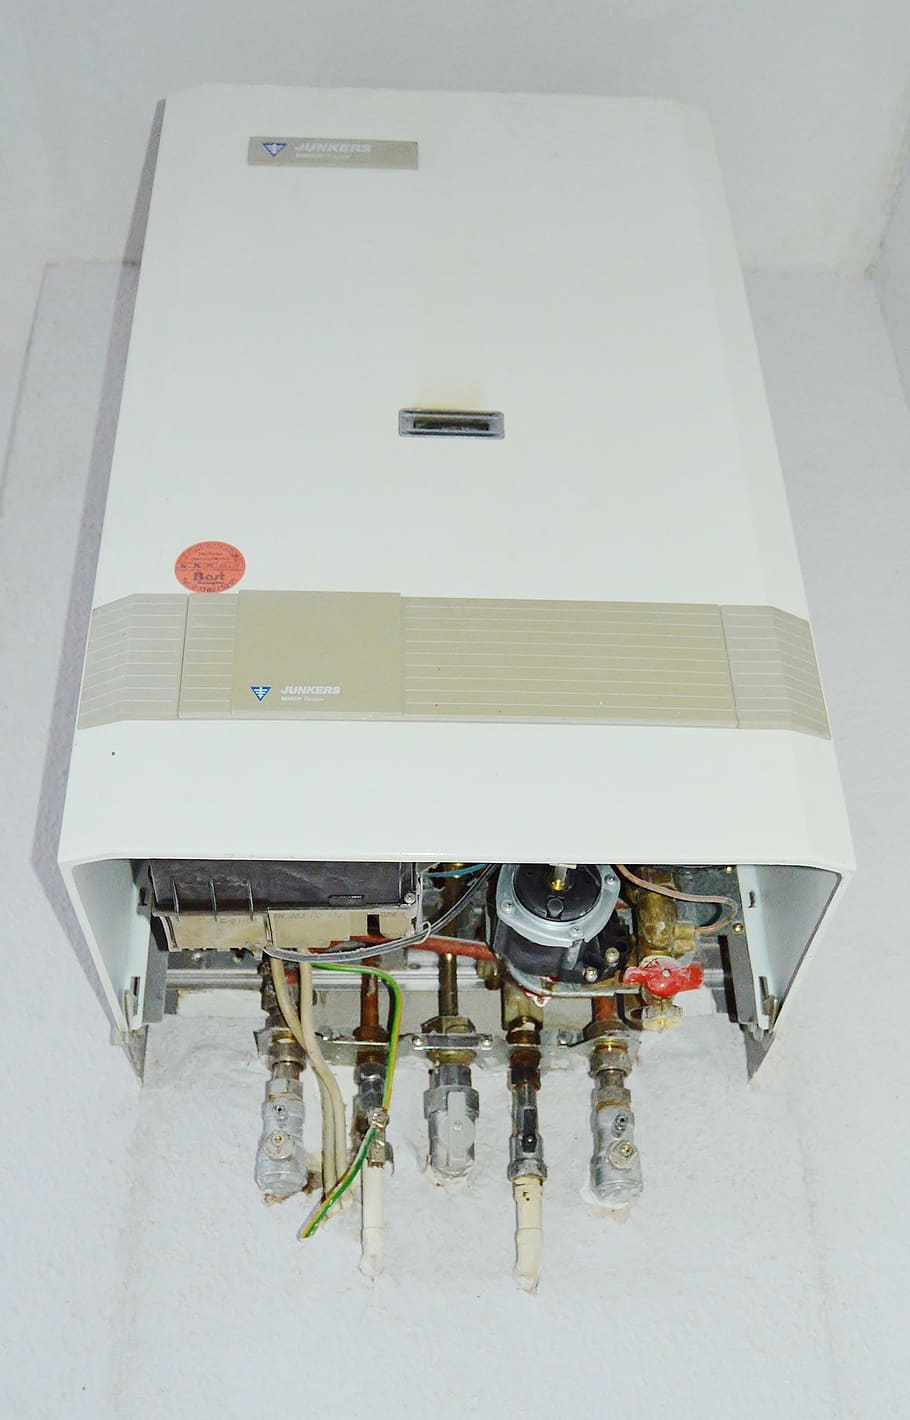 white metal machine, heating, gas water heater, floor heating, junkers, zwr 19, high angle view, white color, indoors, hospital